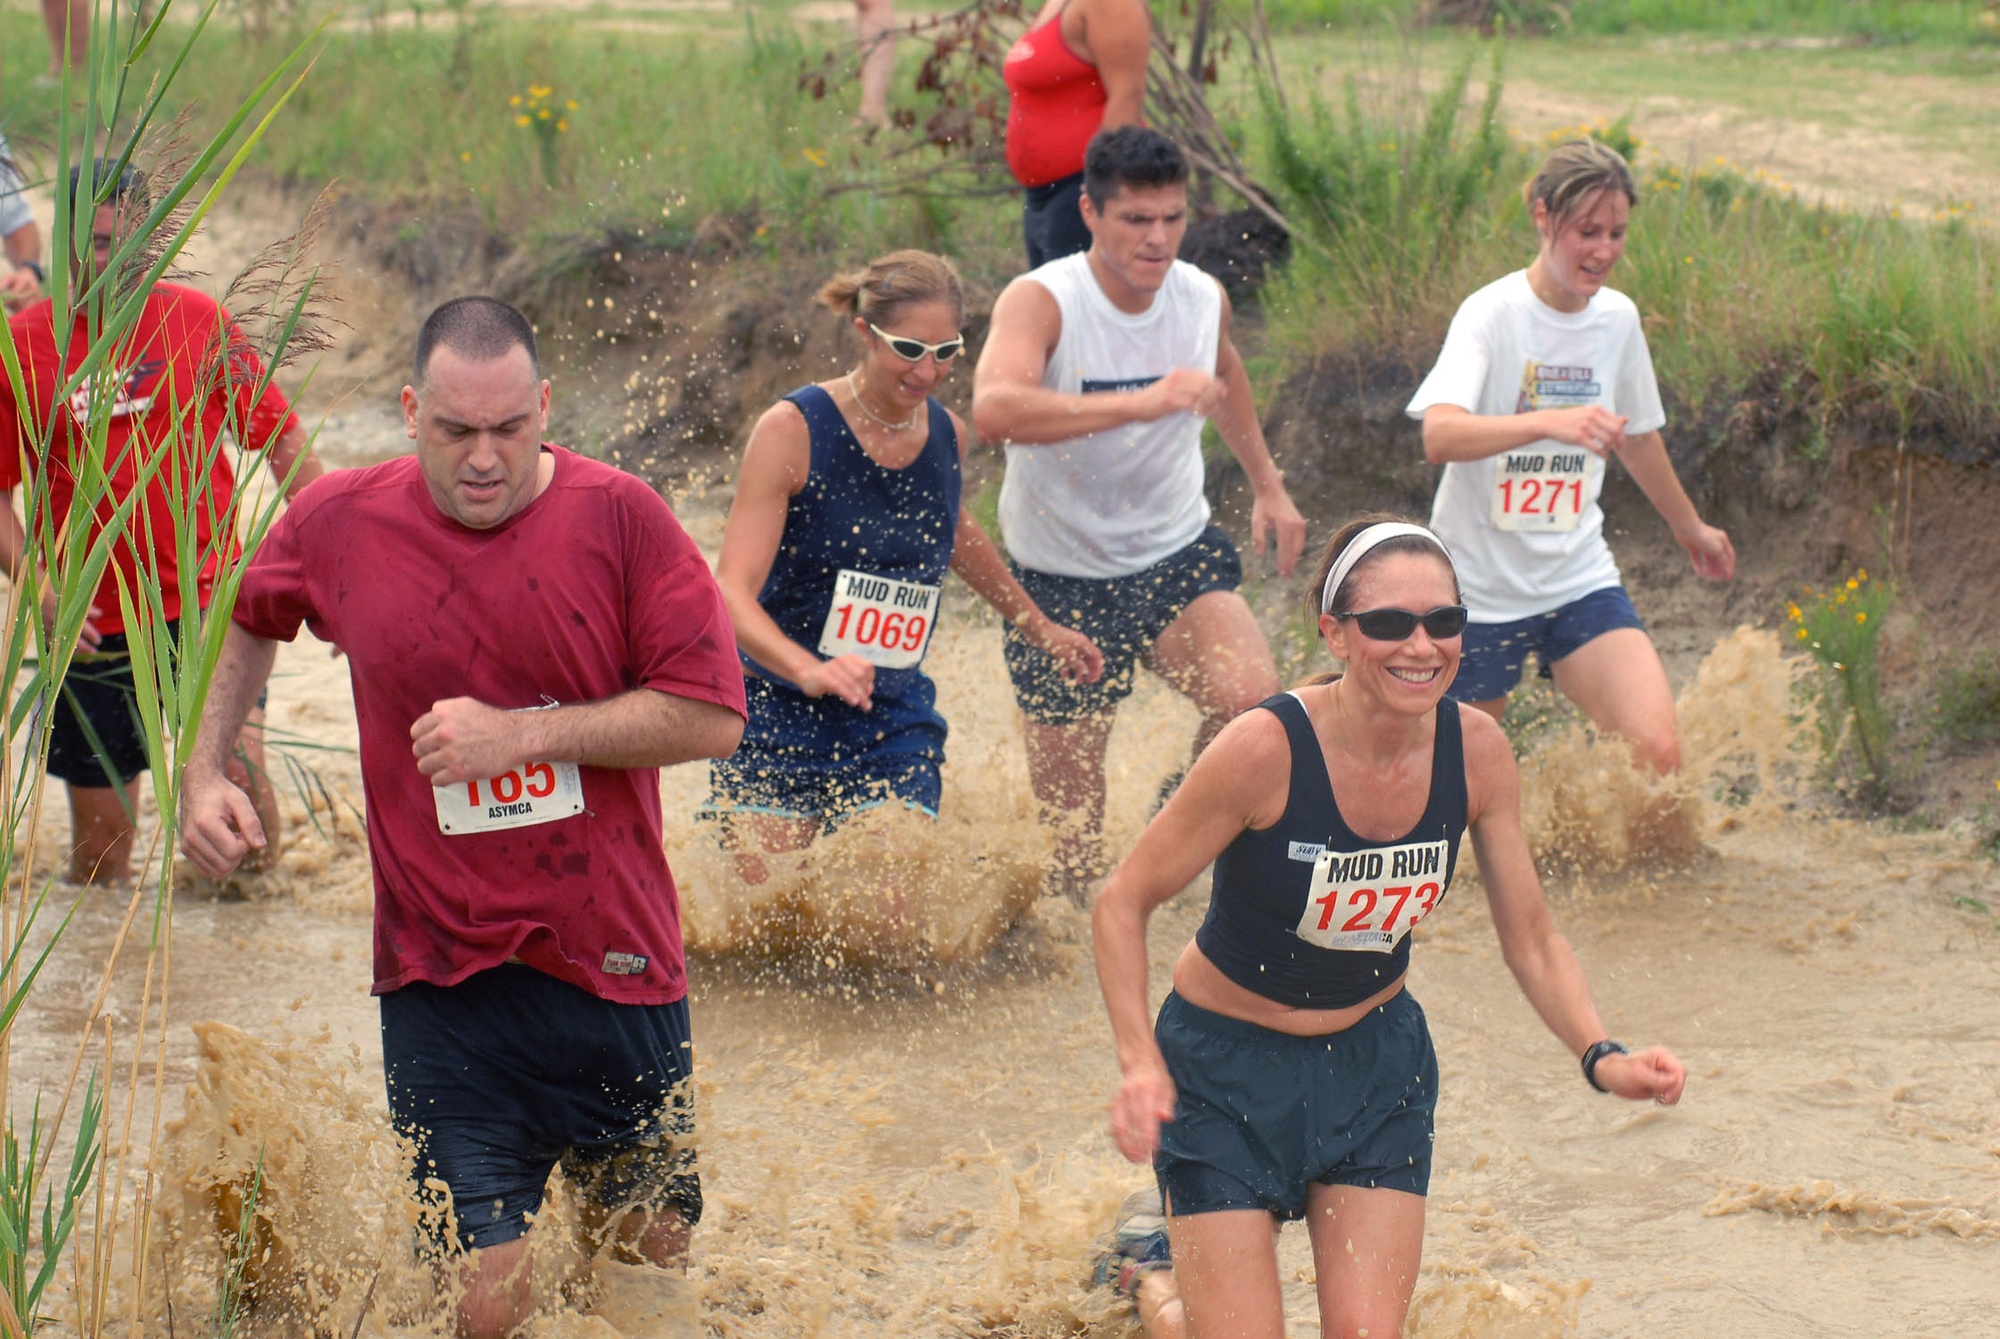 DVIDS - Images - ASYMCA Mud Run [Image 2 of 4]